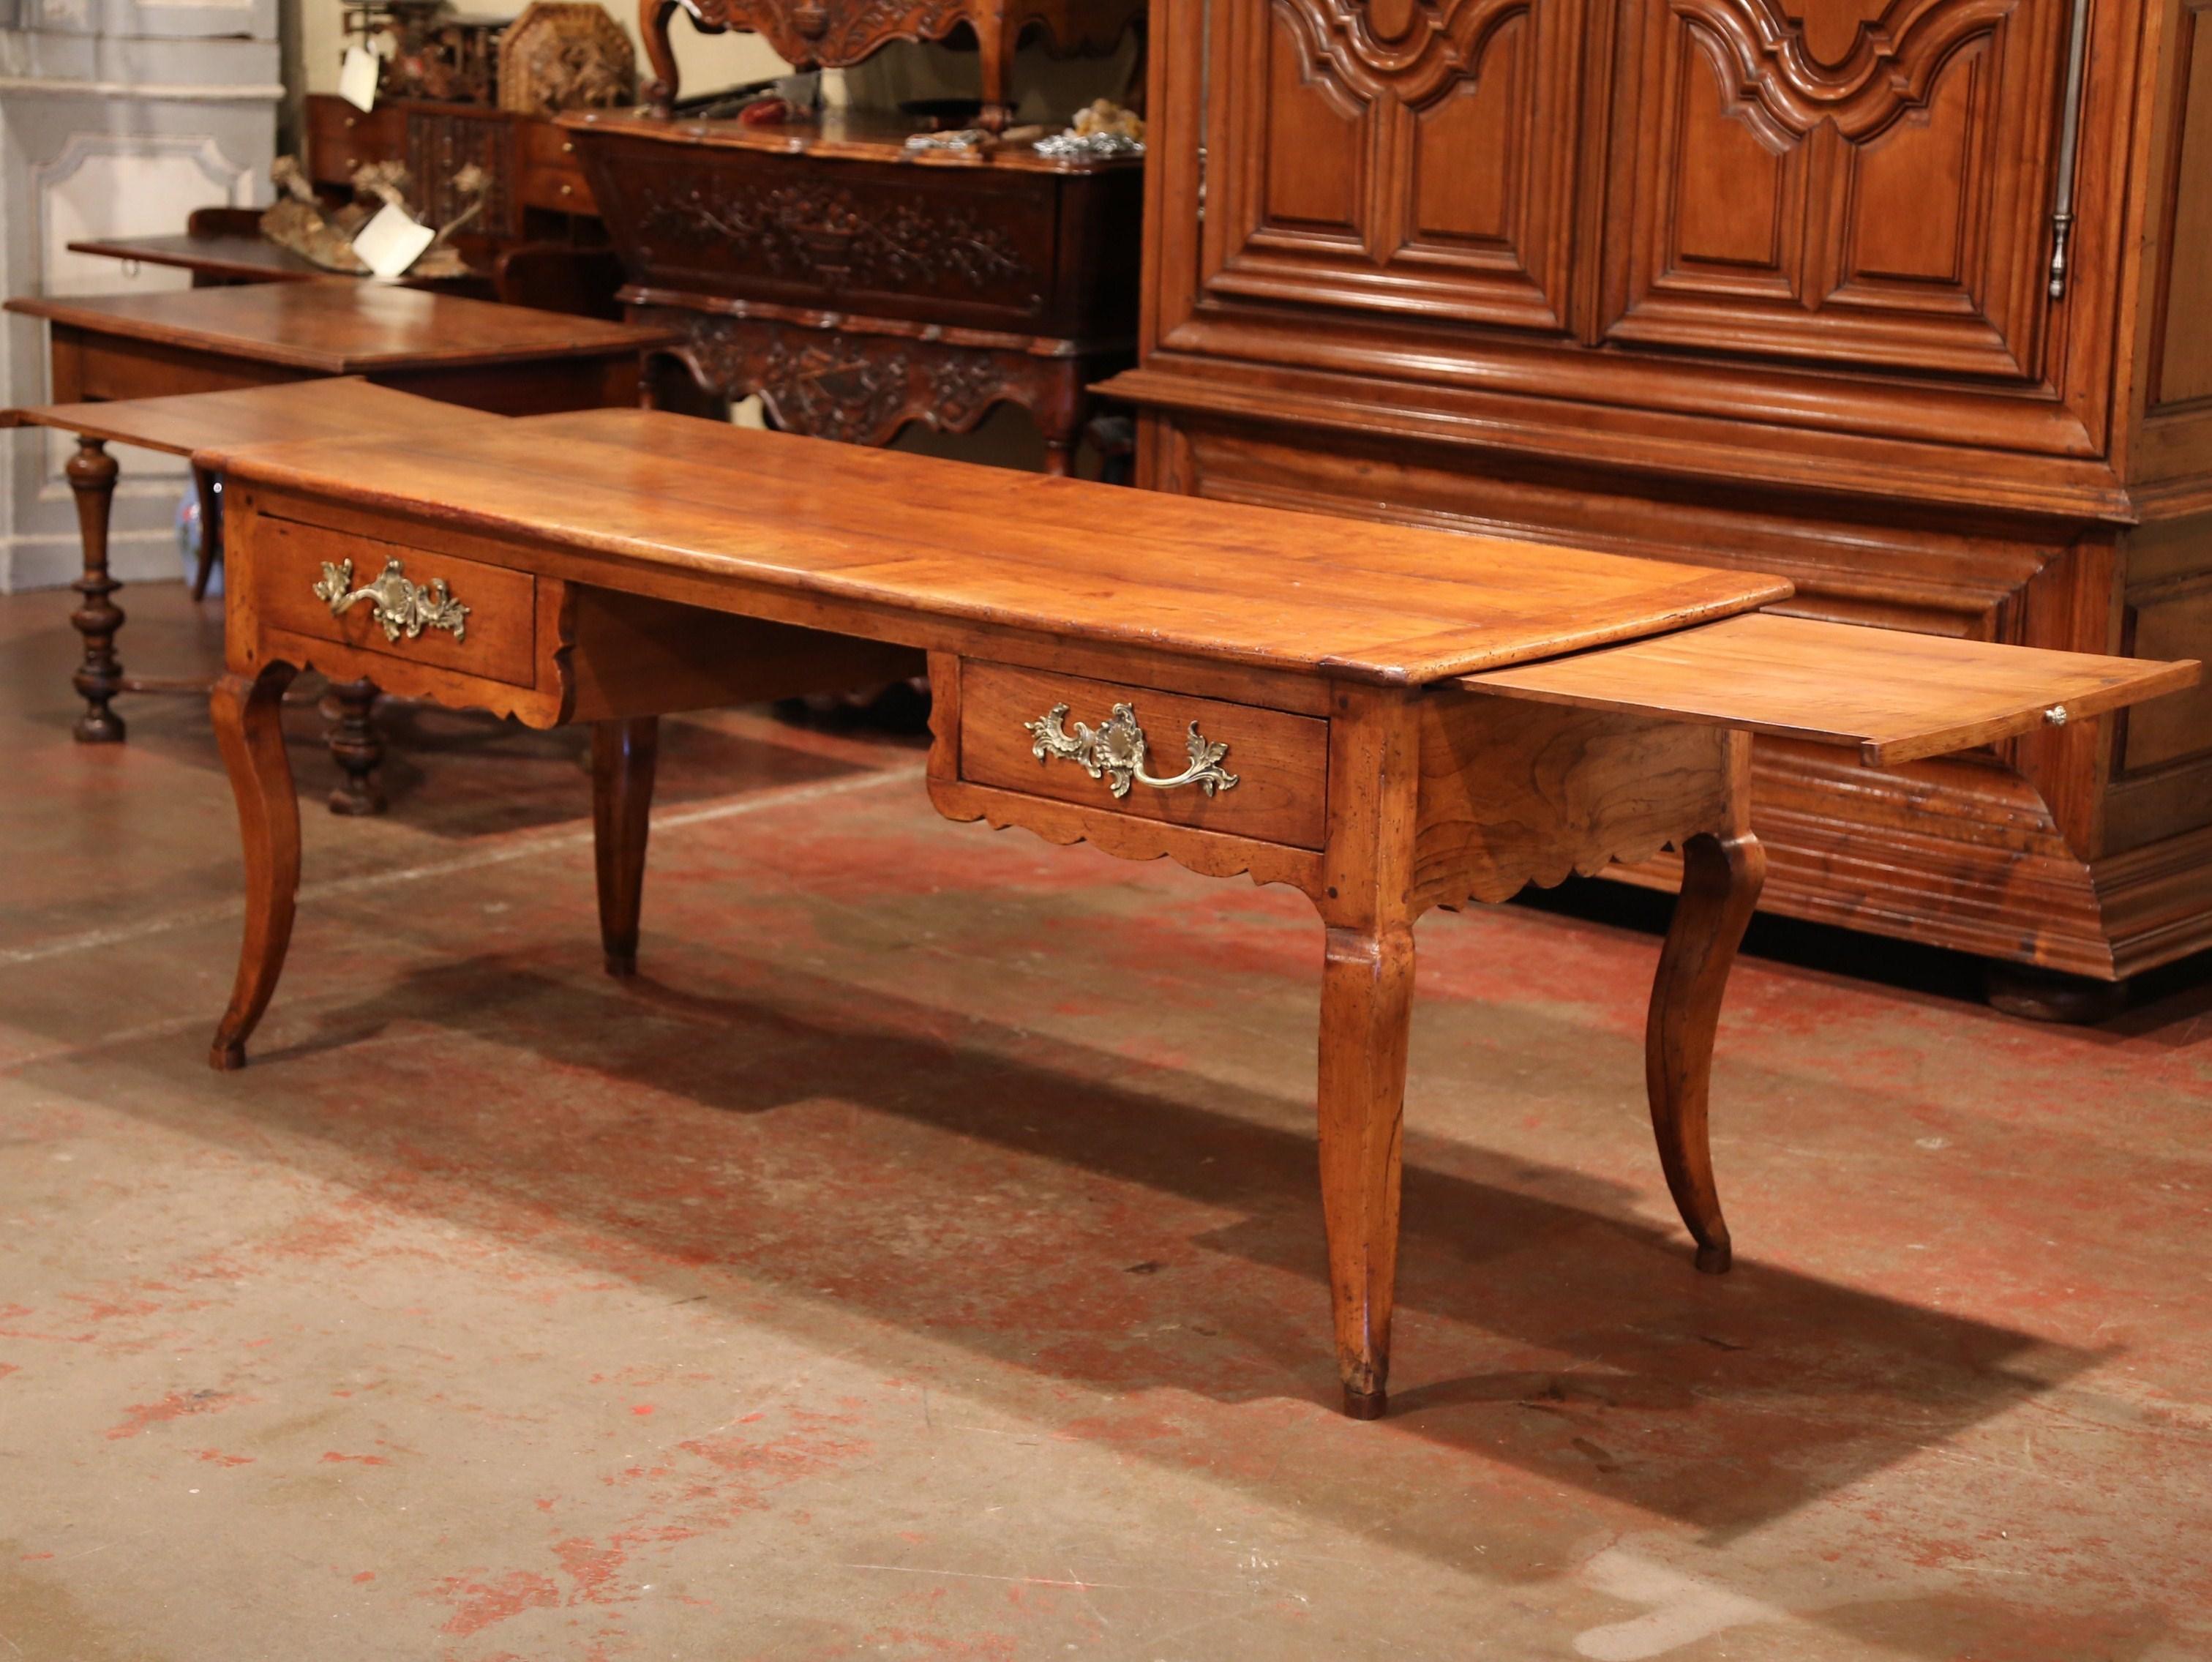 18th Century French Louis XV Carved Cherry Desk with Drawers and Pullout Trays 2